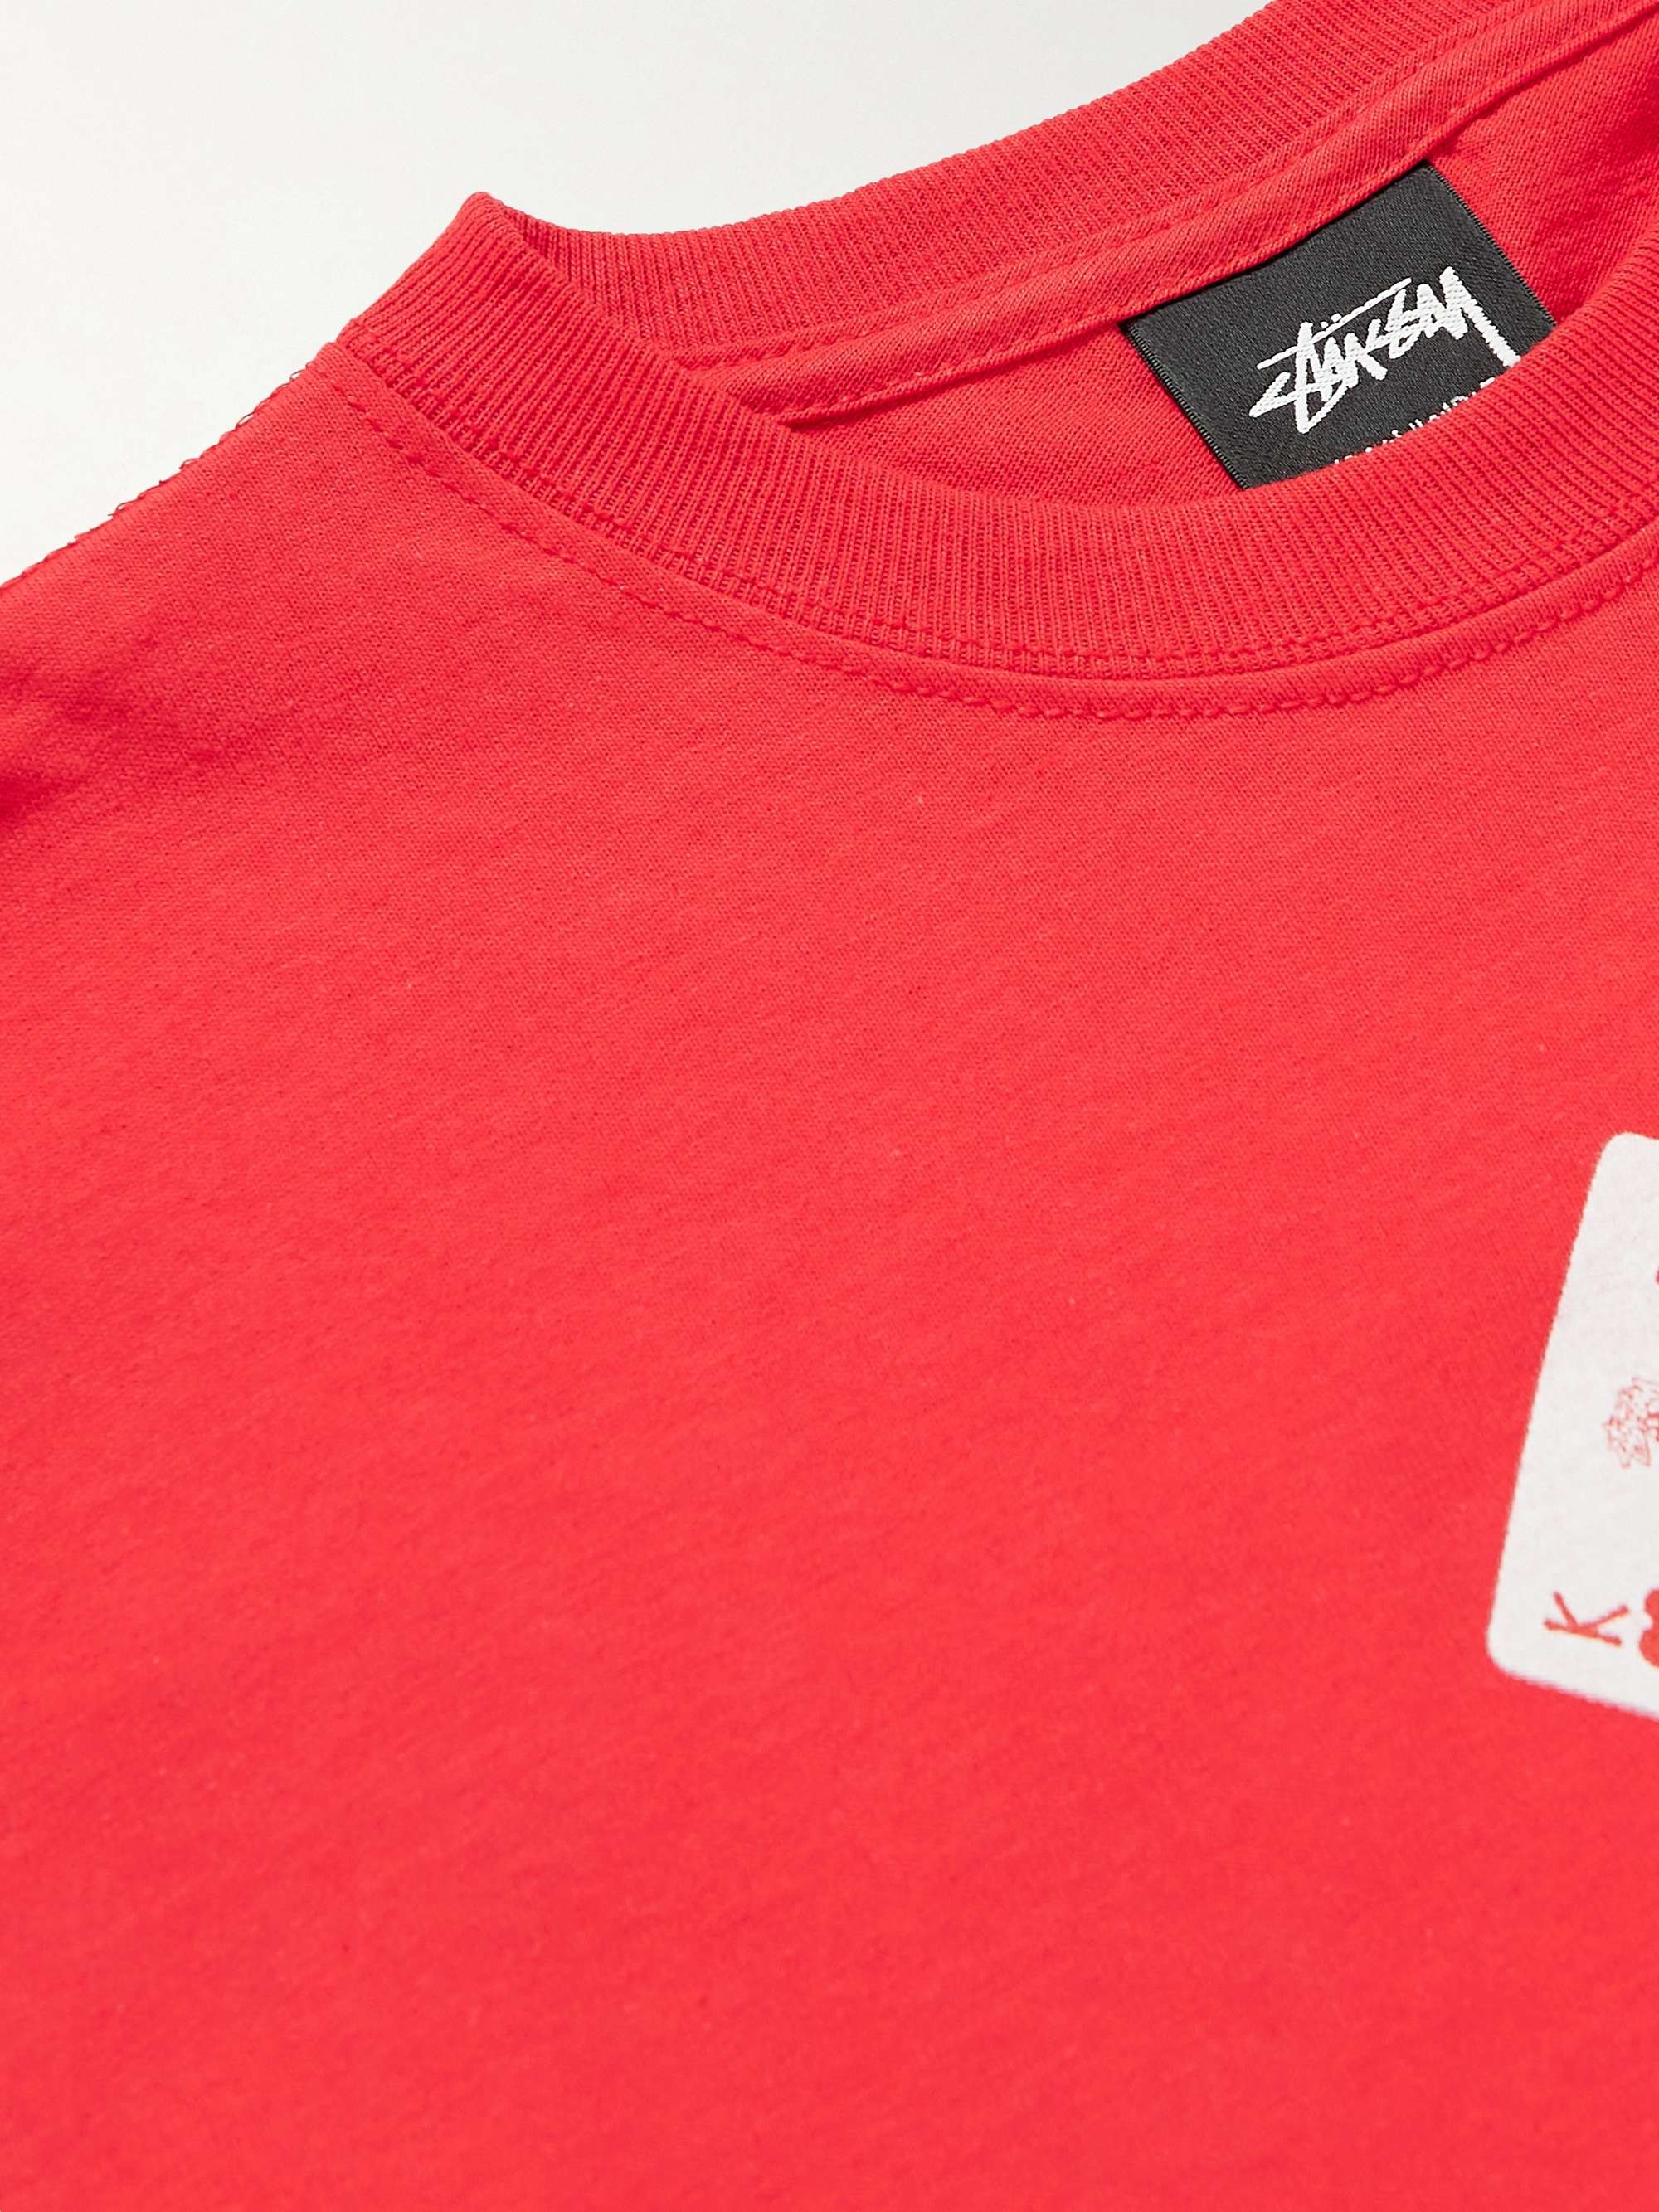 STÜSSY House of Cards Printed Cotton-Jersey T-Shirt